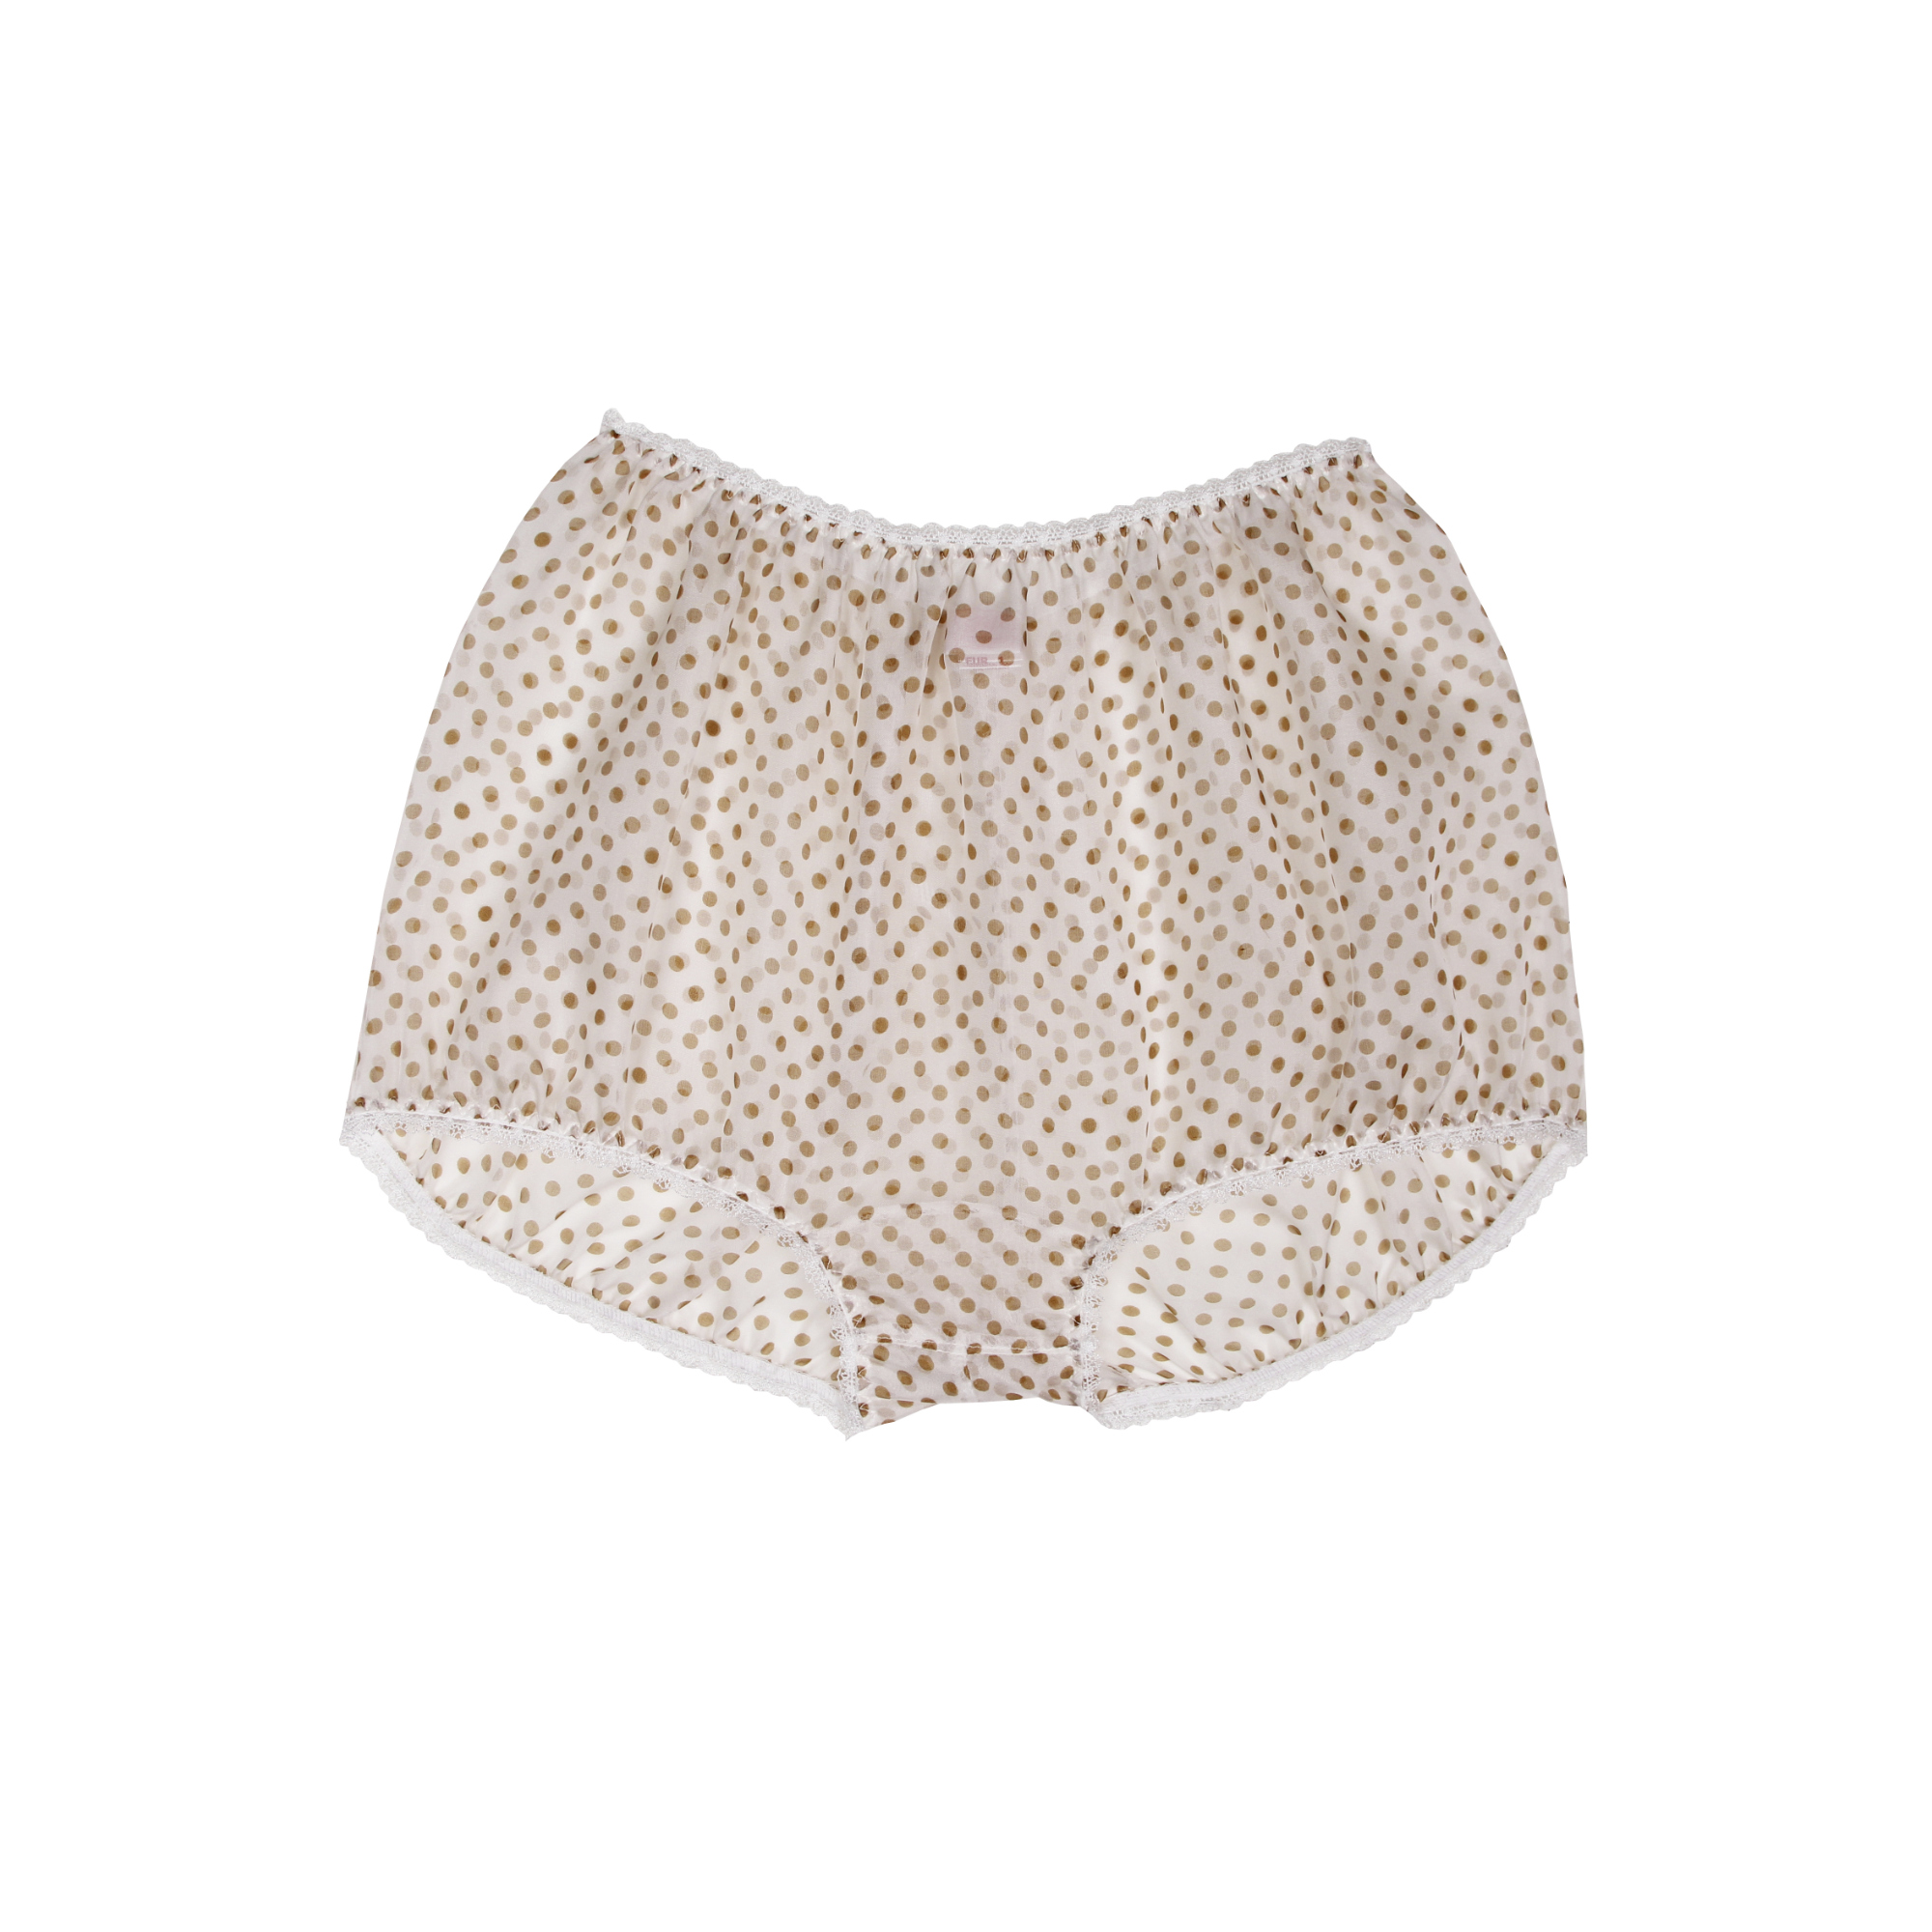 “Bloomy” culotte | Fifi Chachnil - Official website